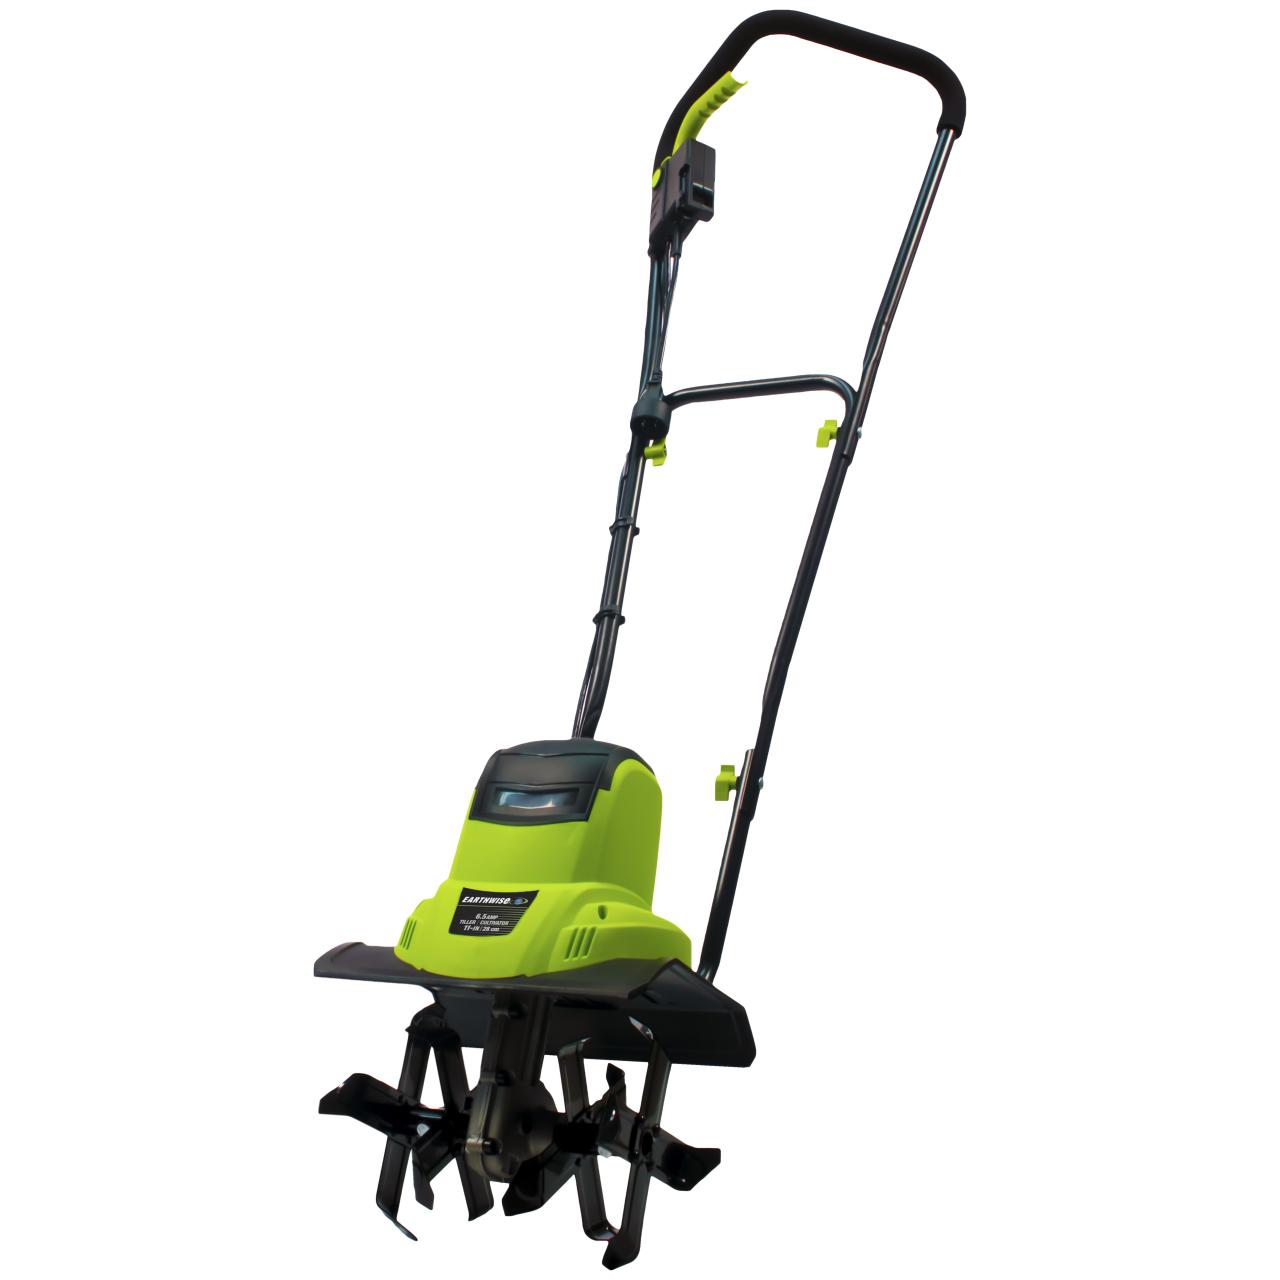 Buy Earthwise TC70065 6.5 Amp Corded Electric Tiller Cultivator Online in  Hong Kong. 973299002